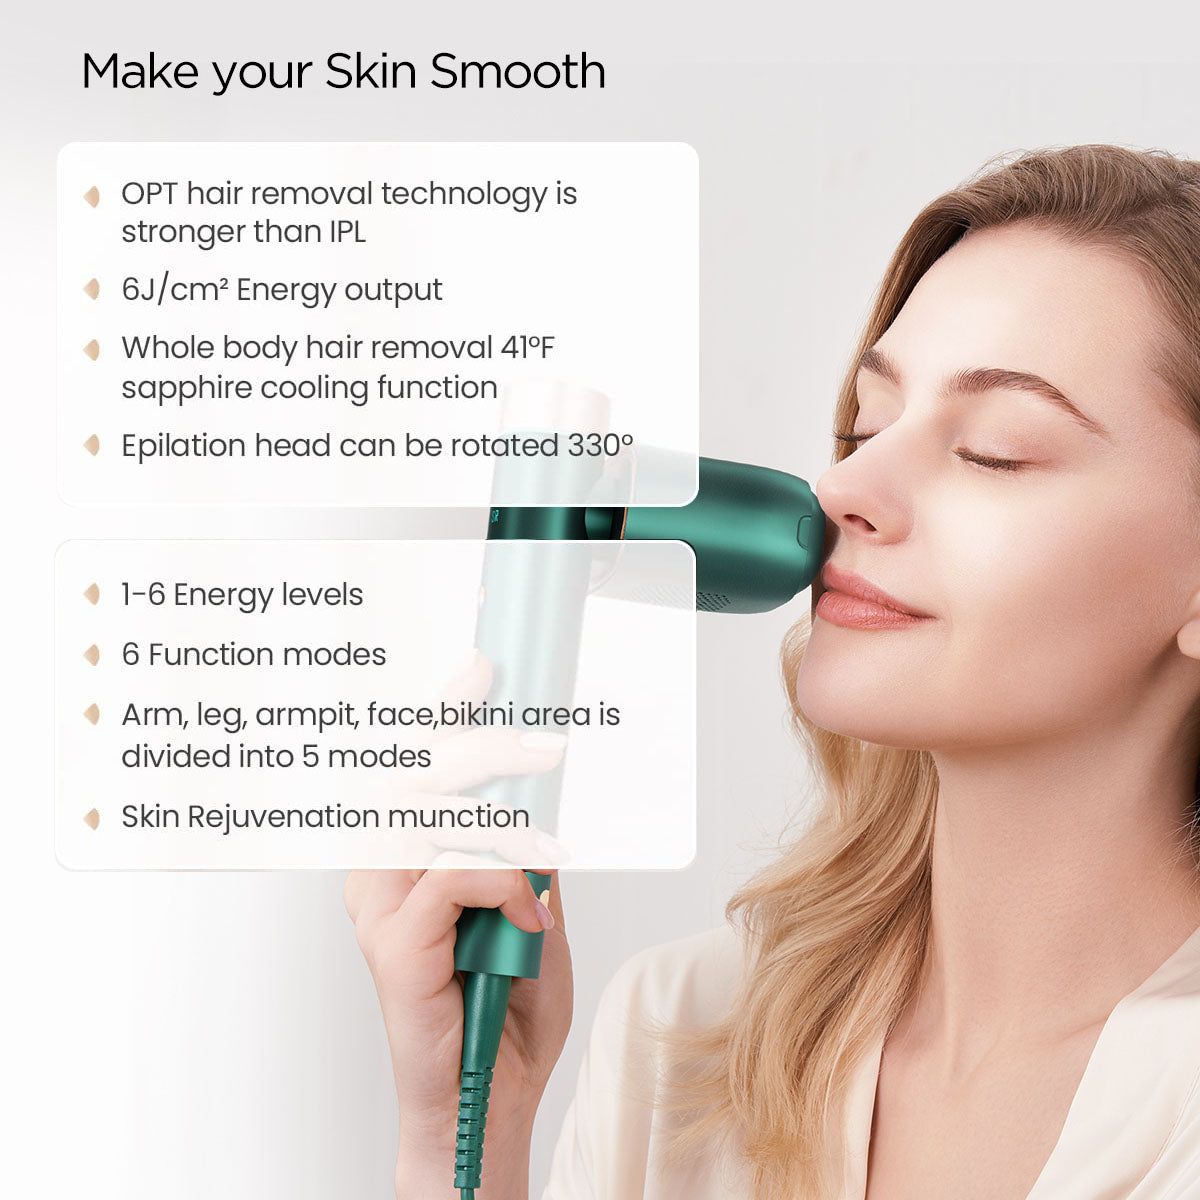 Woman experiencing smooth skin with JOVS OPT Hair Removal Technology, featuring sapphire cooling and 330° rotating head.